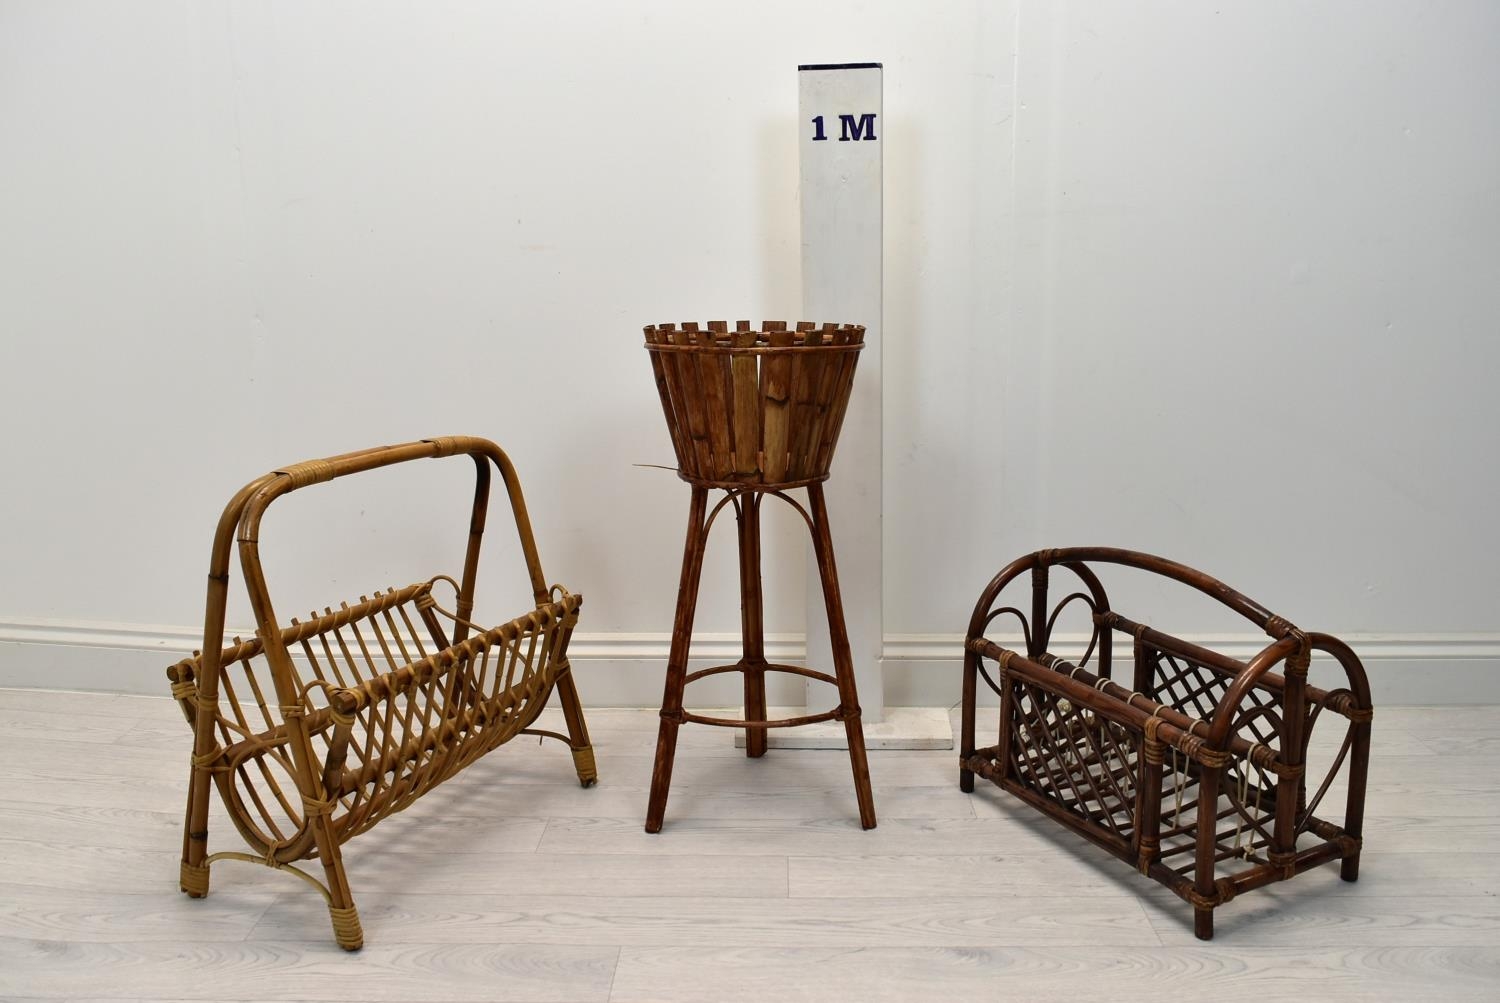 Two mid 20th century bamboo magazine stands together with a mid 20th century wicker plant stand - Image 2 of 3